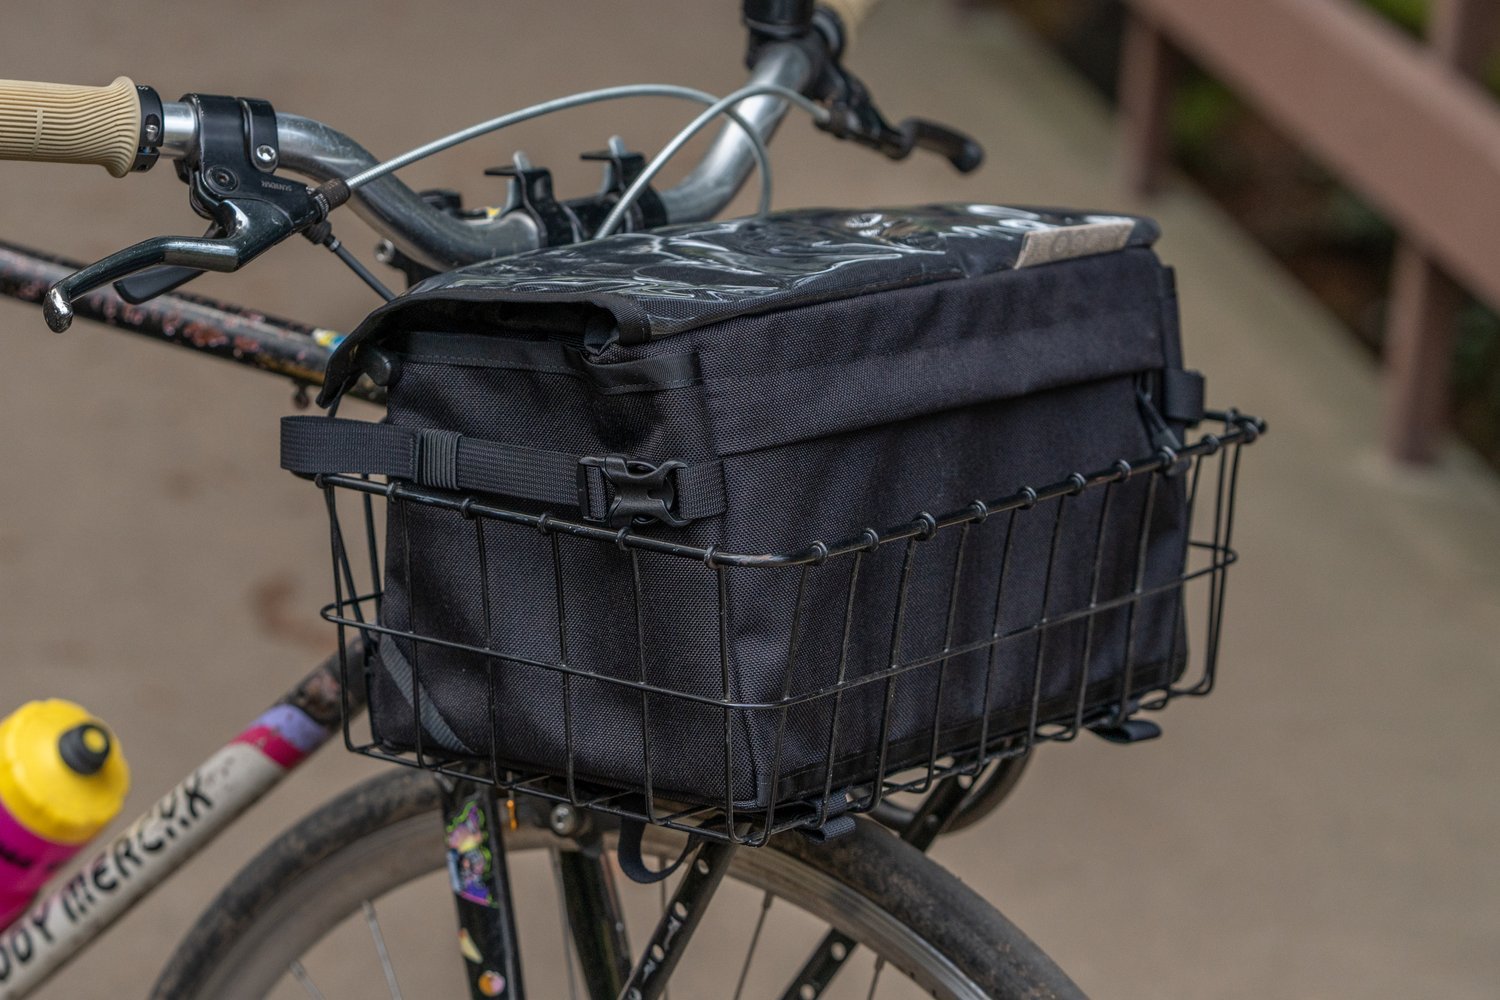 Rack Bags and Basket Bags - Outer Shell Bike Bags